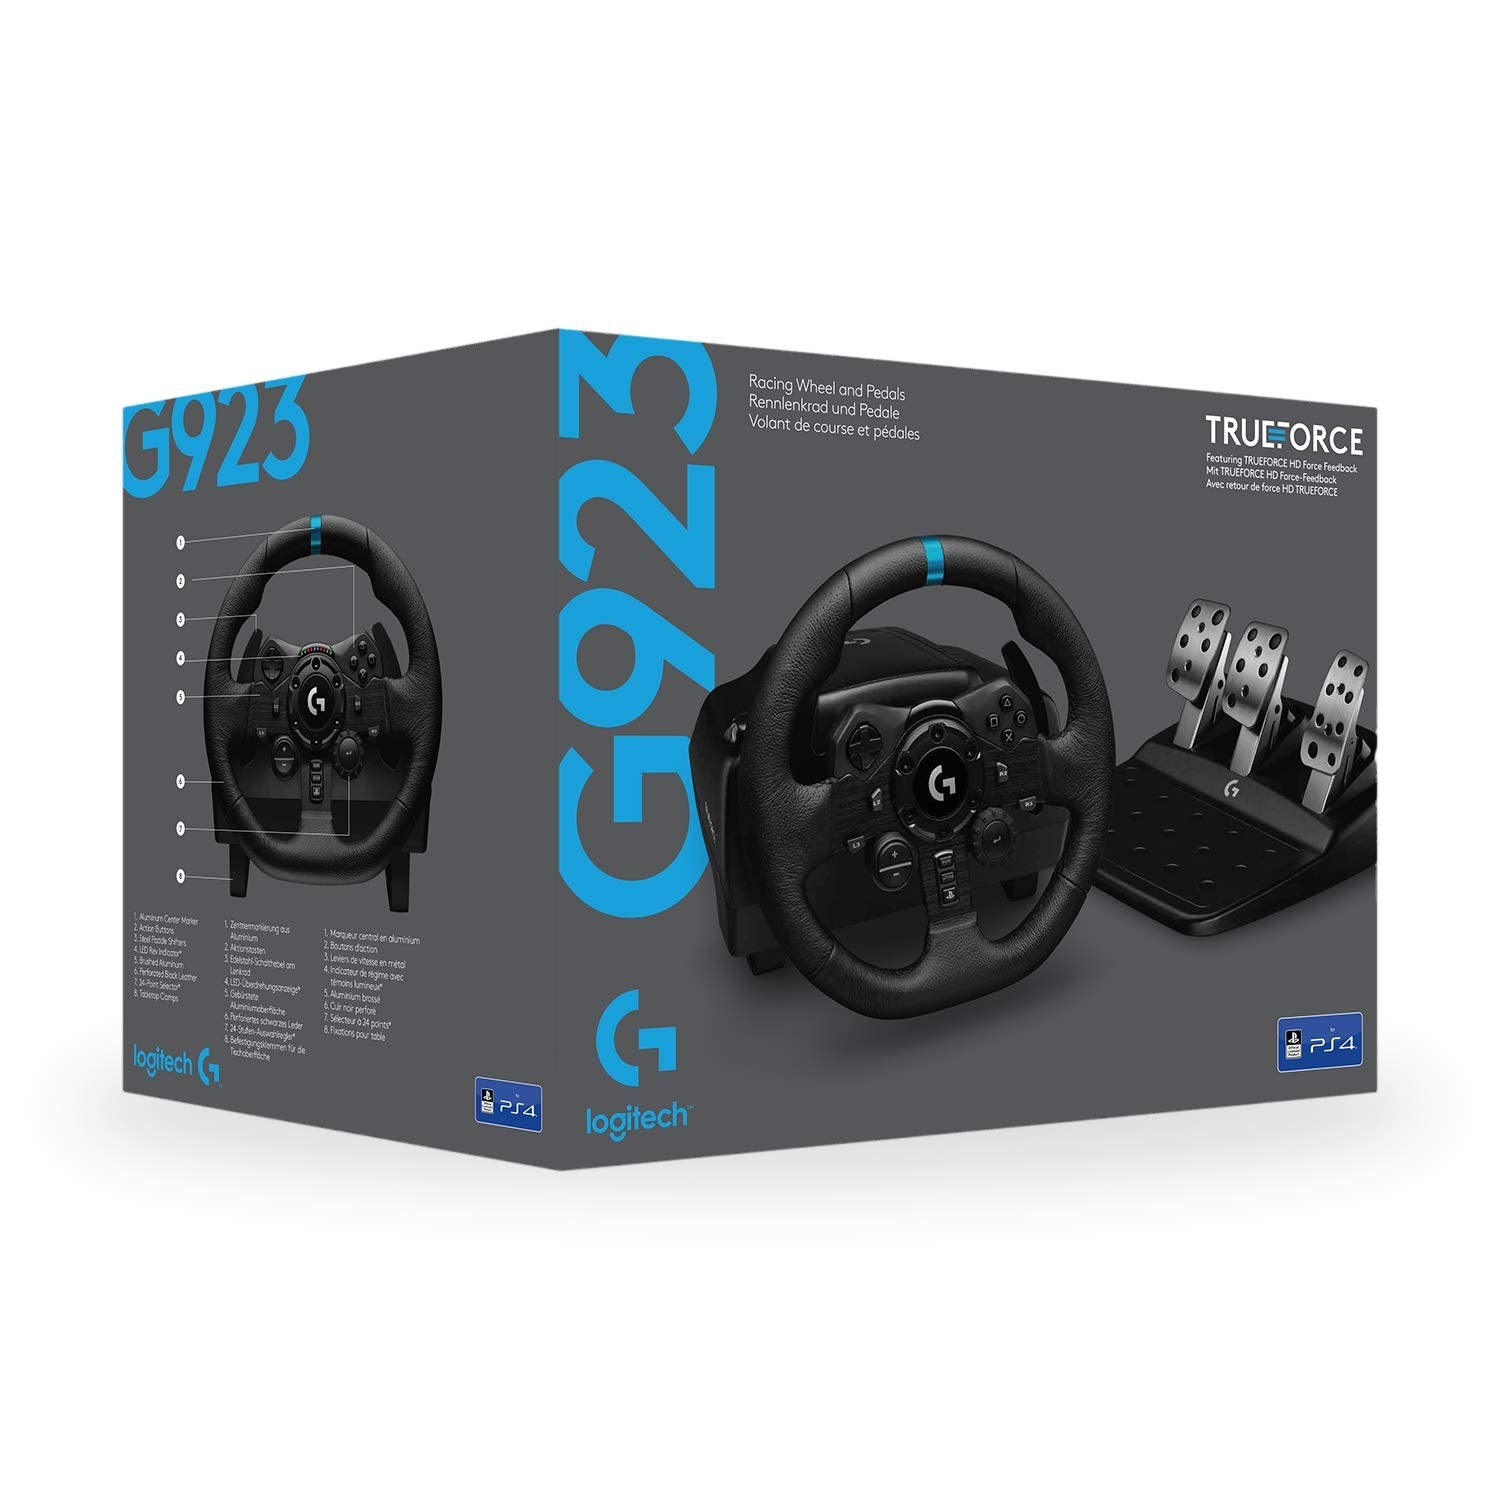 G923 Racing Wheel & Pedals for PS4, PS5 & PC - TRUEFORCE